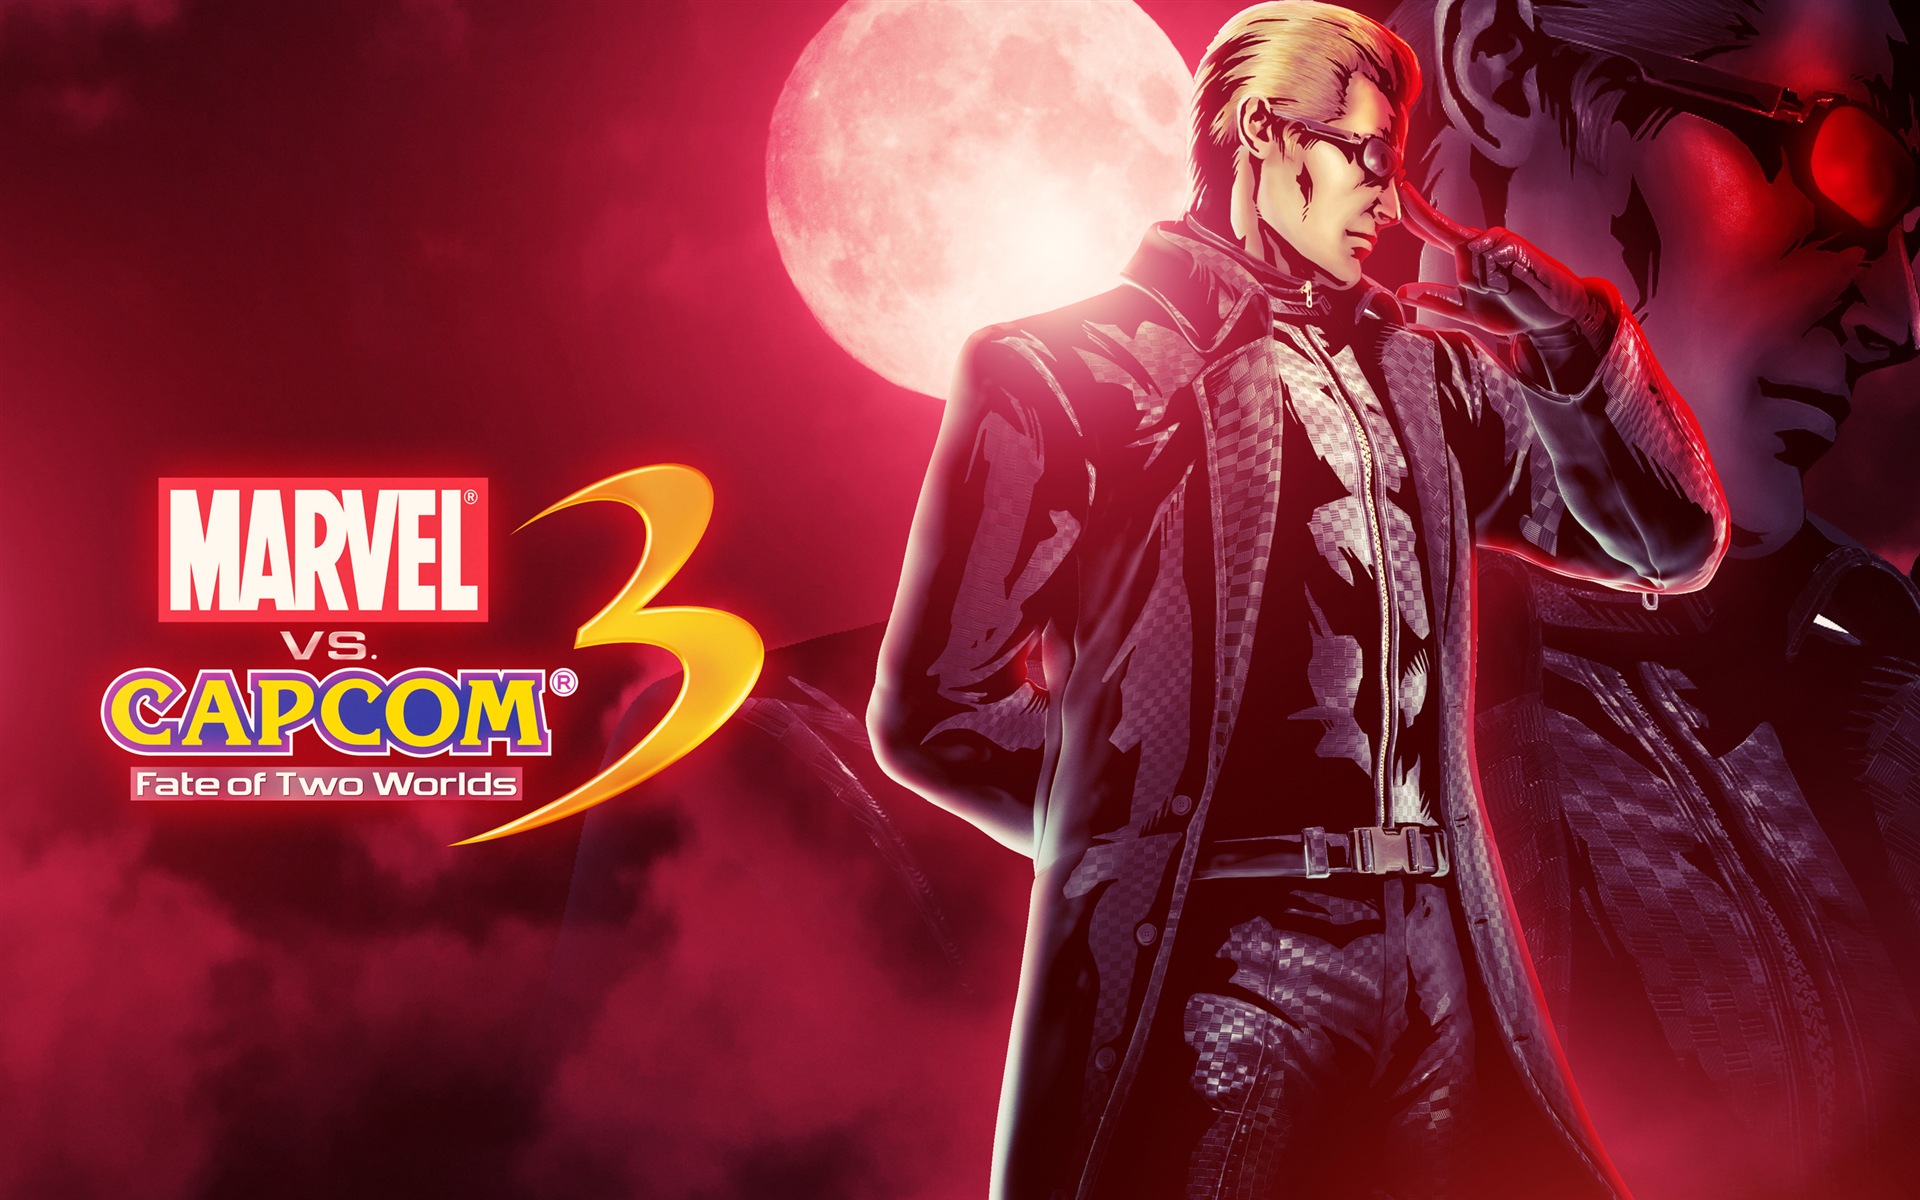 Marvel VS. Capcom 3: Fate of Two Worlds HD game wallpapers #9 - 1920x1200